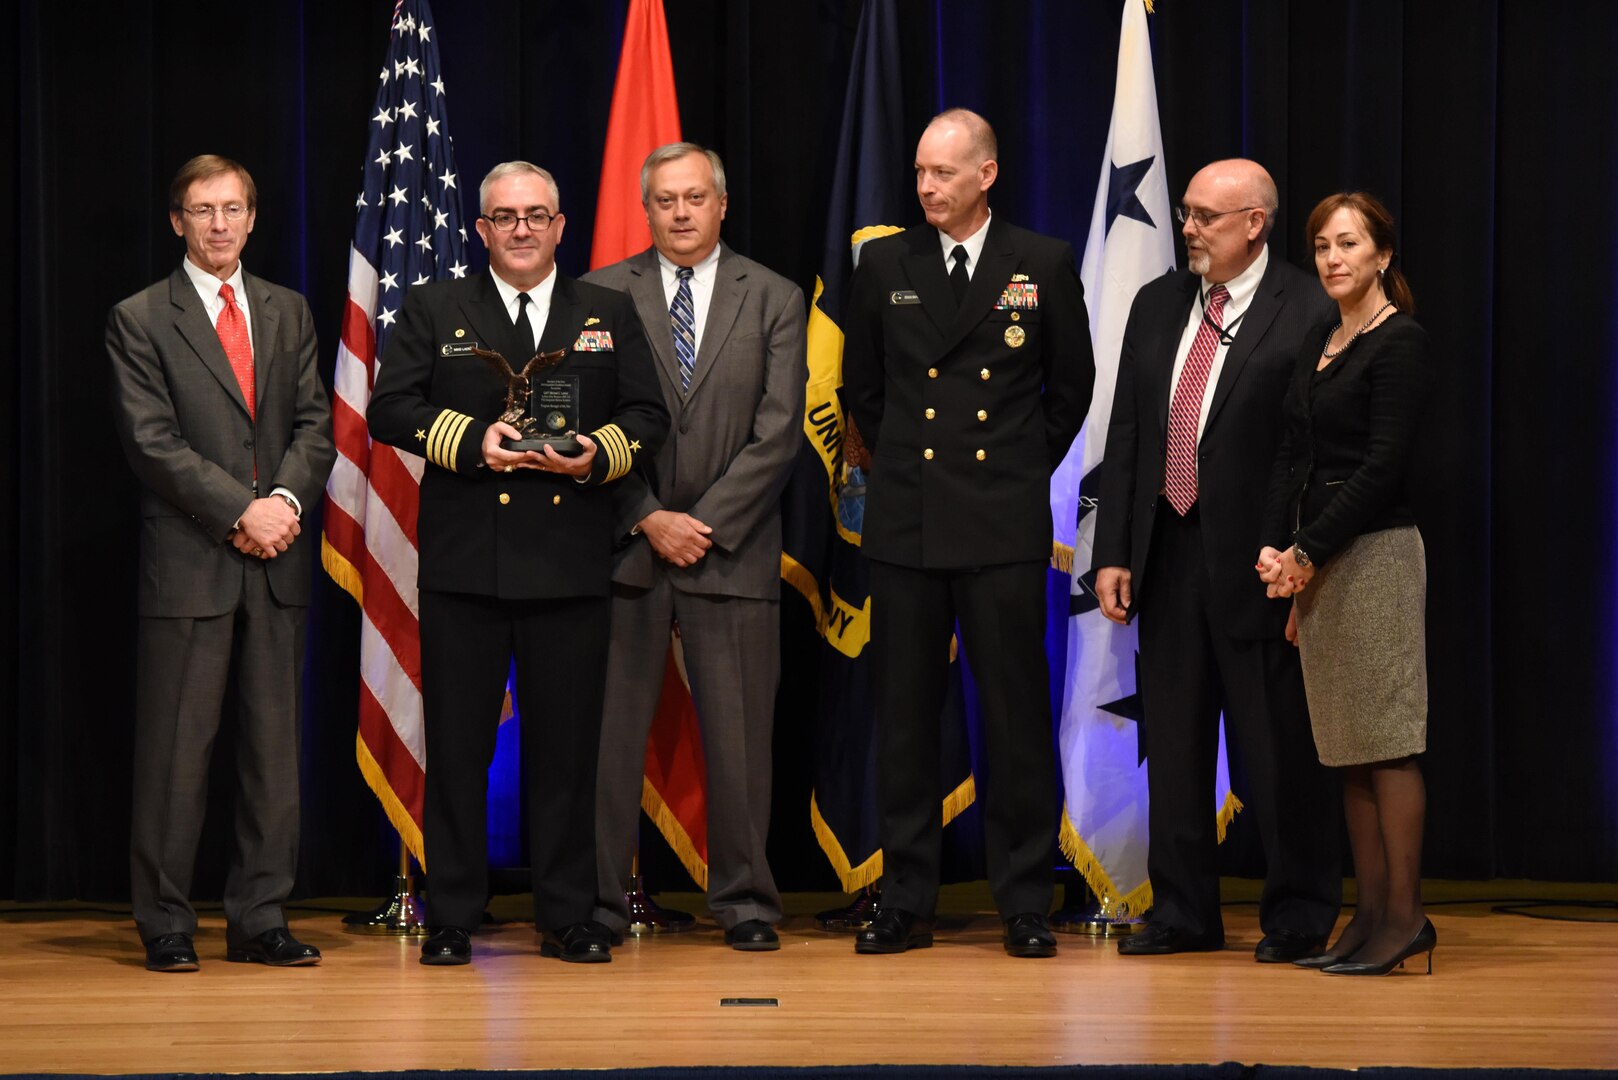 Capt. Michael Ladner, program manager Surface Ship Weapons holds his Program Manager of the Year award during the 2016 Department of the Navy Acquisition Excellence Awards ceremony at the Pentagon, Nov. 17.

Also pictured from left to right: Sean Stackley, Assistant Secretary of the Navy (Research, Development and Acquisition); William Bray, executive director, Program Executive Office Integrated Warfare Systems; Rear Adm. Doug Small, Program Executive Office Integrated Warfare Systems; Bill Deligne, executive director, Naval Sea Systems Command; Janine Anne Davidson, Under Secretary of the United States Navy.
